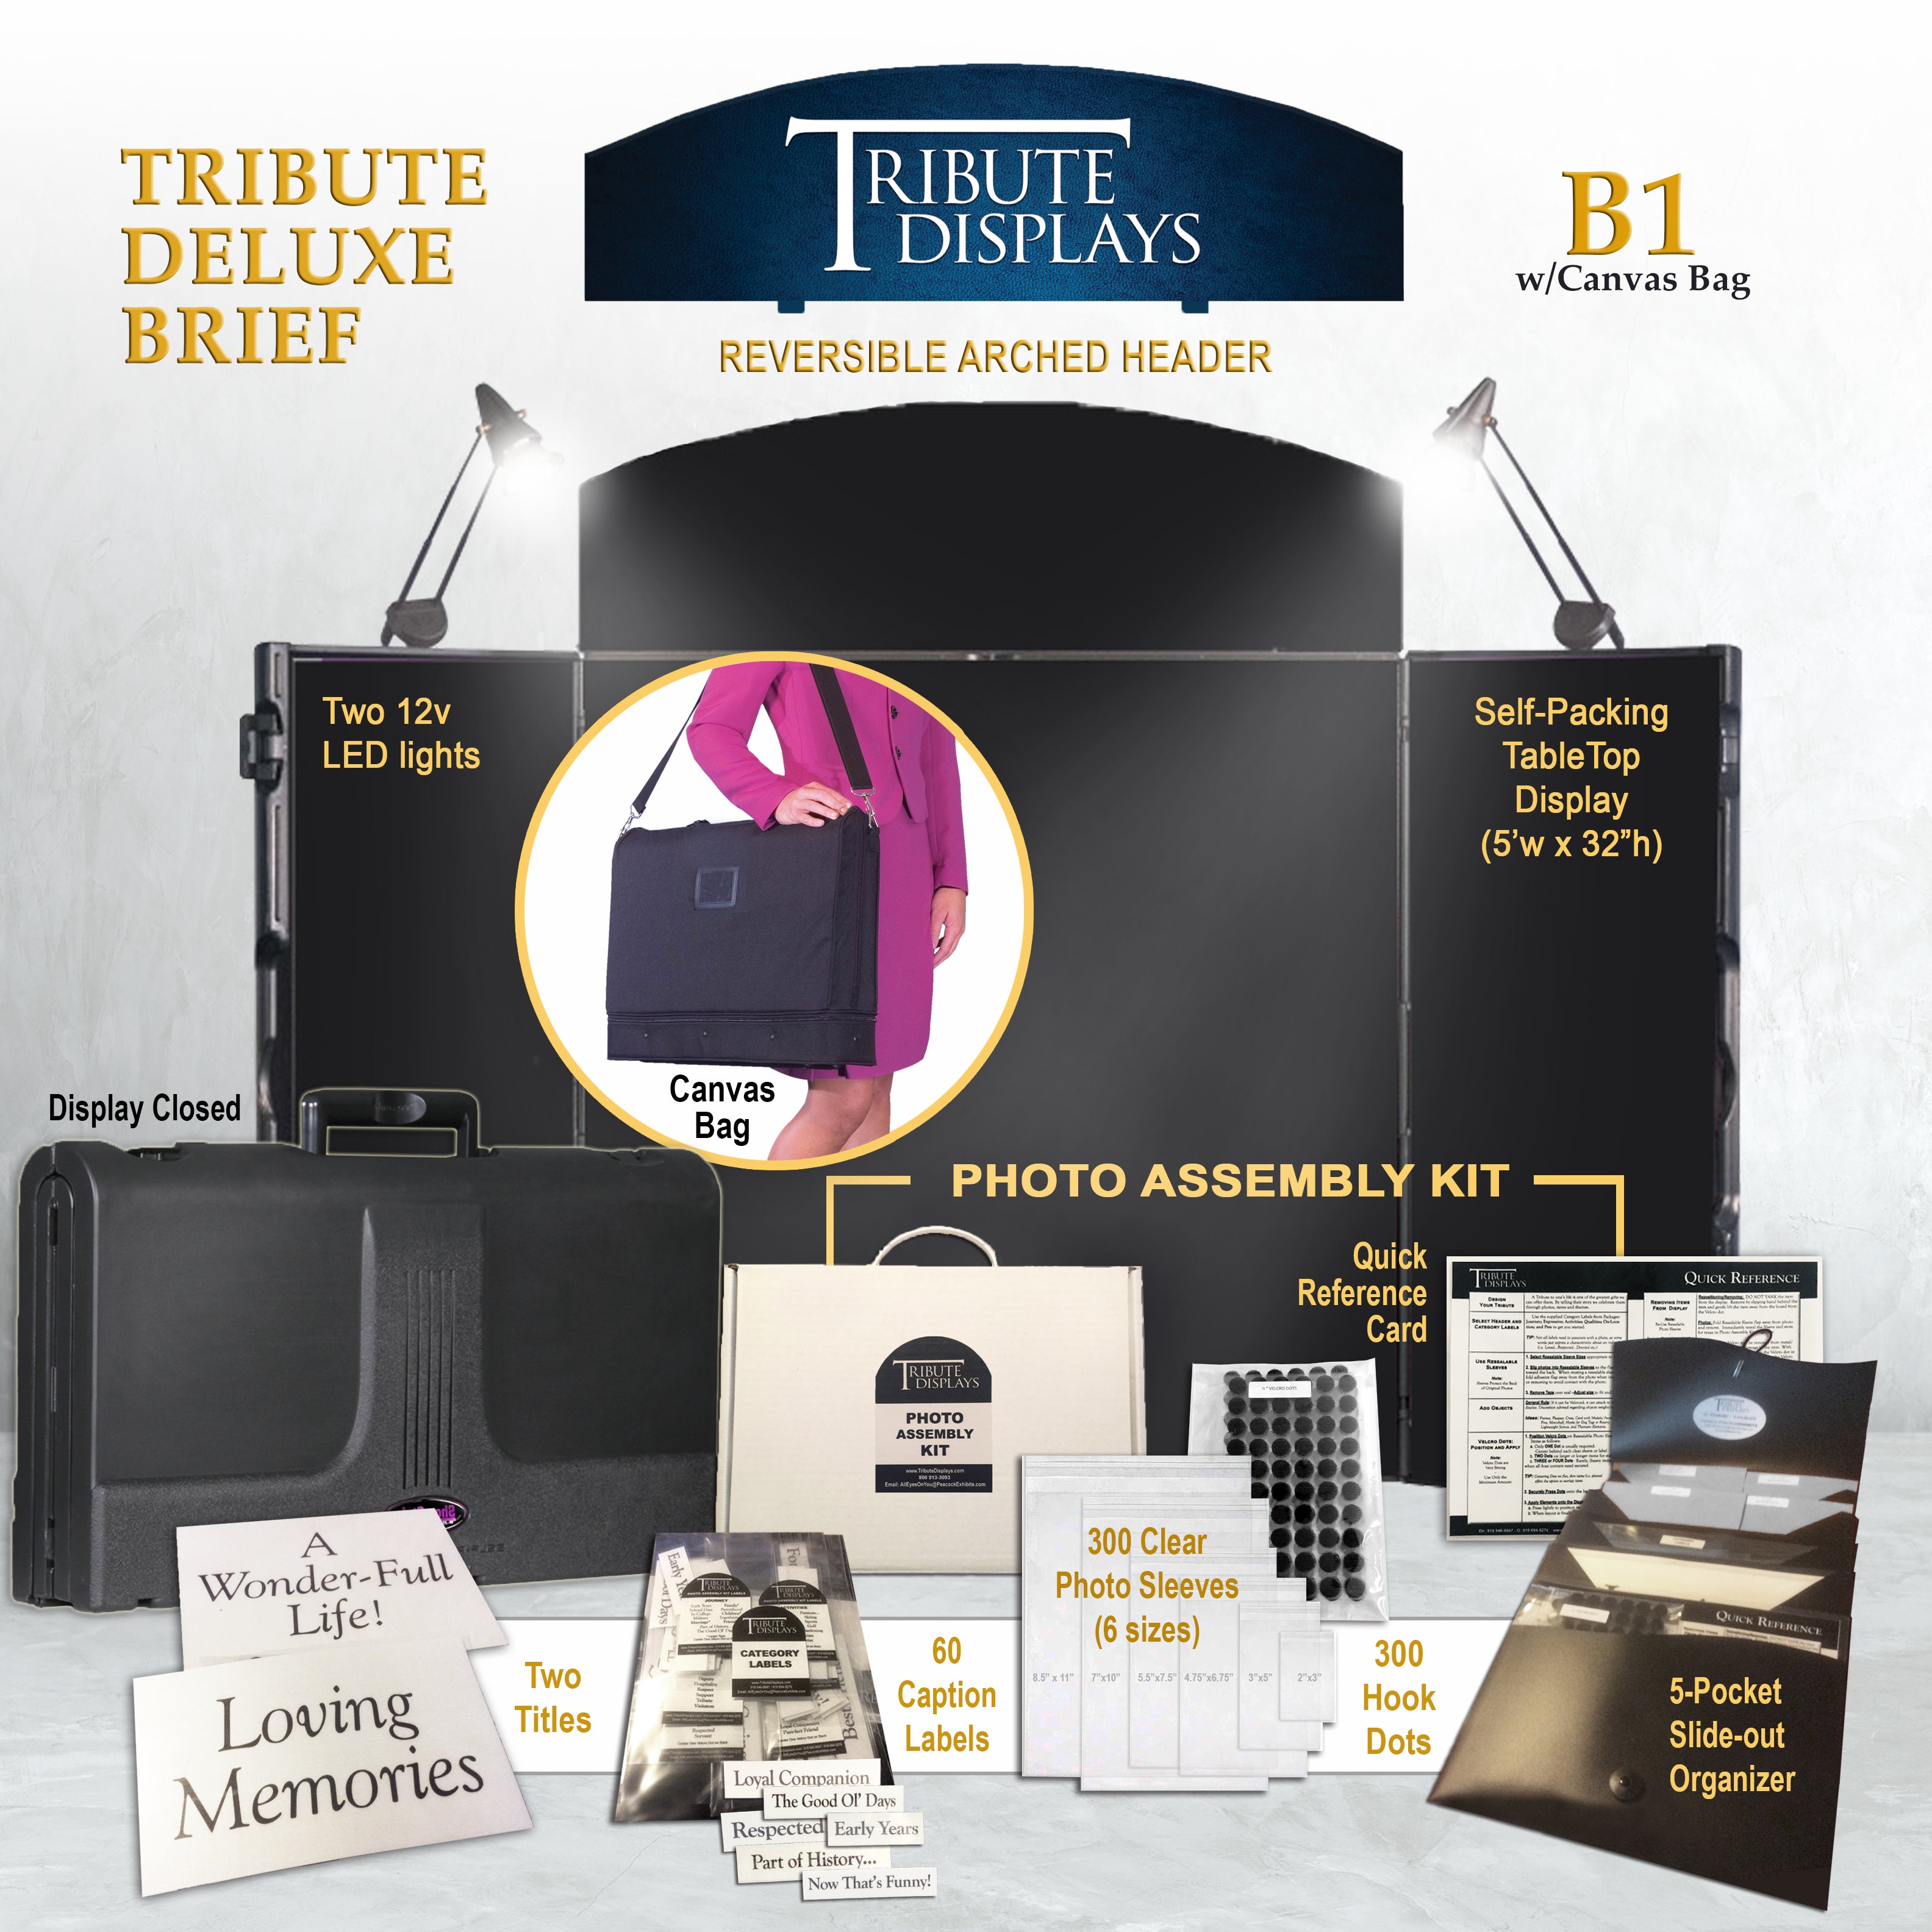 System Bundle "AB": 2-Tier Tribute - (Max + Deluxe)